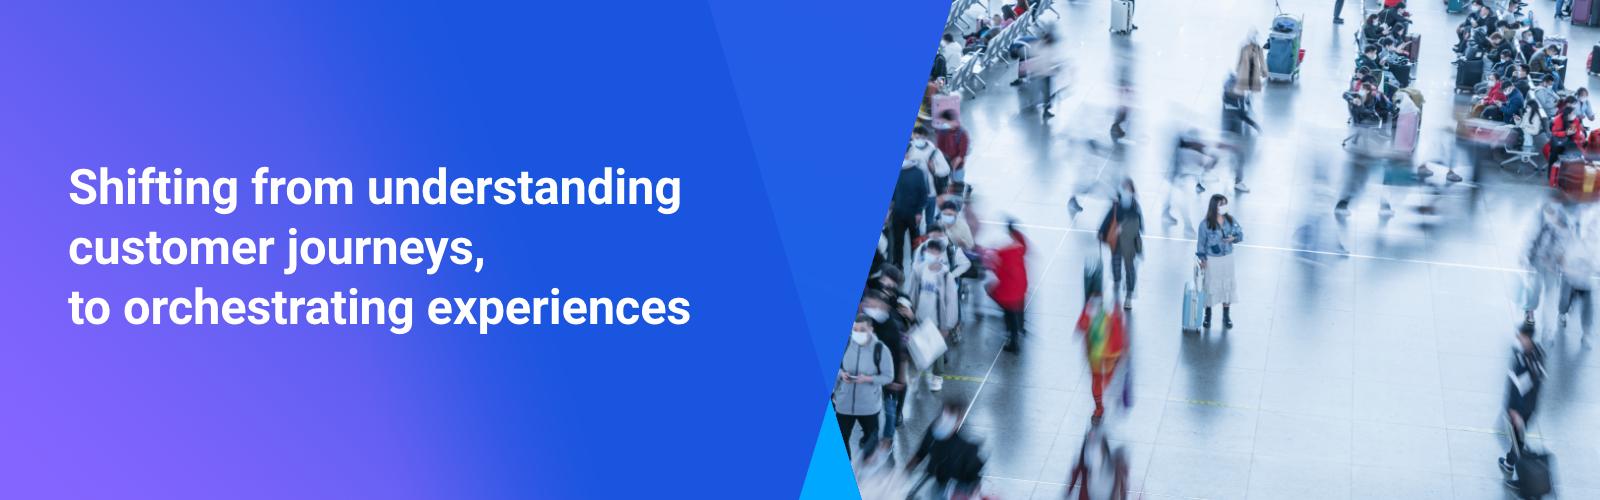 Shifting from understanding customer journeys, to orchestrating experiences